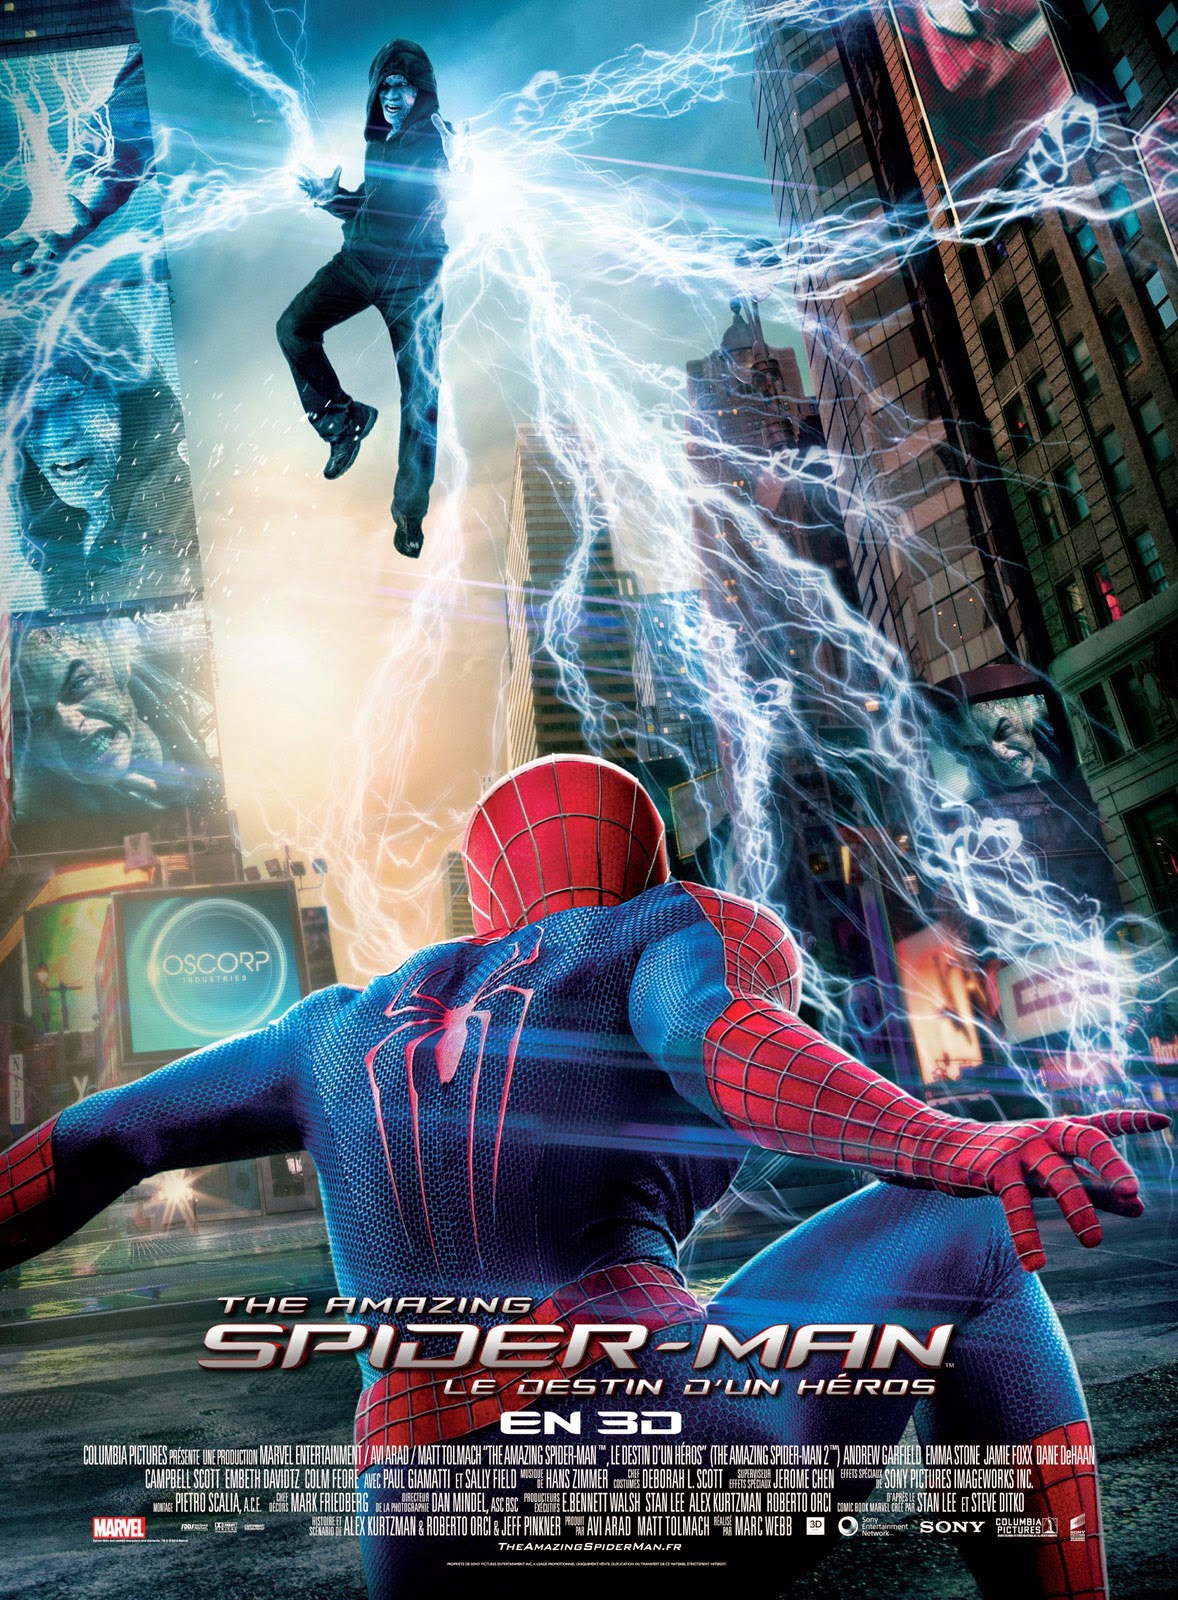 http://fuckingcinephiles.blogspot.fr/2014/04/critique-amazing-spider-man-le-destin.html#uds-search-results